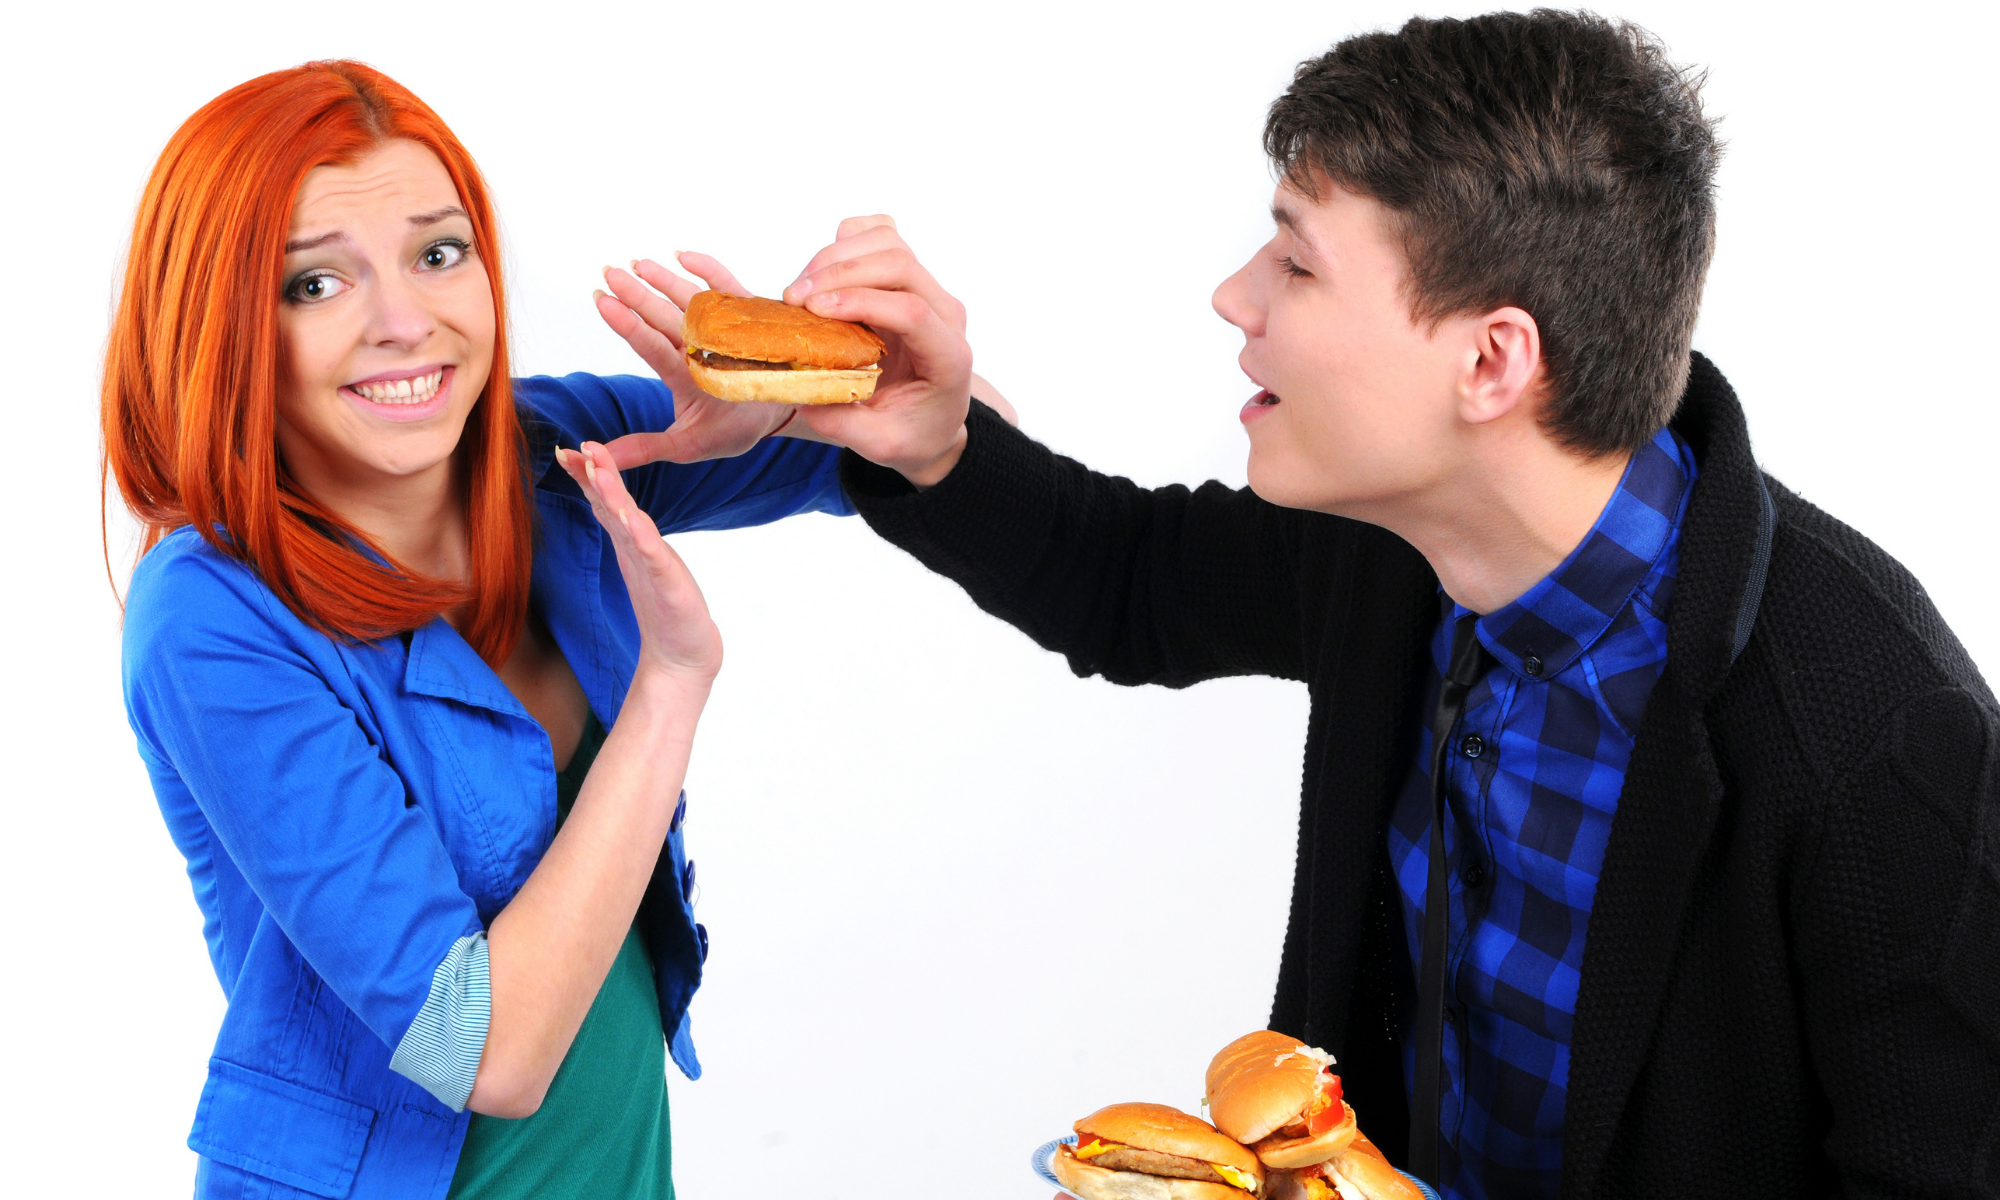 Woman holds up hands in refusal of hamburger aggressively offered by man holding a plate of burgers